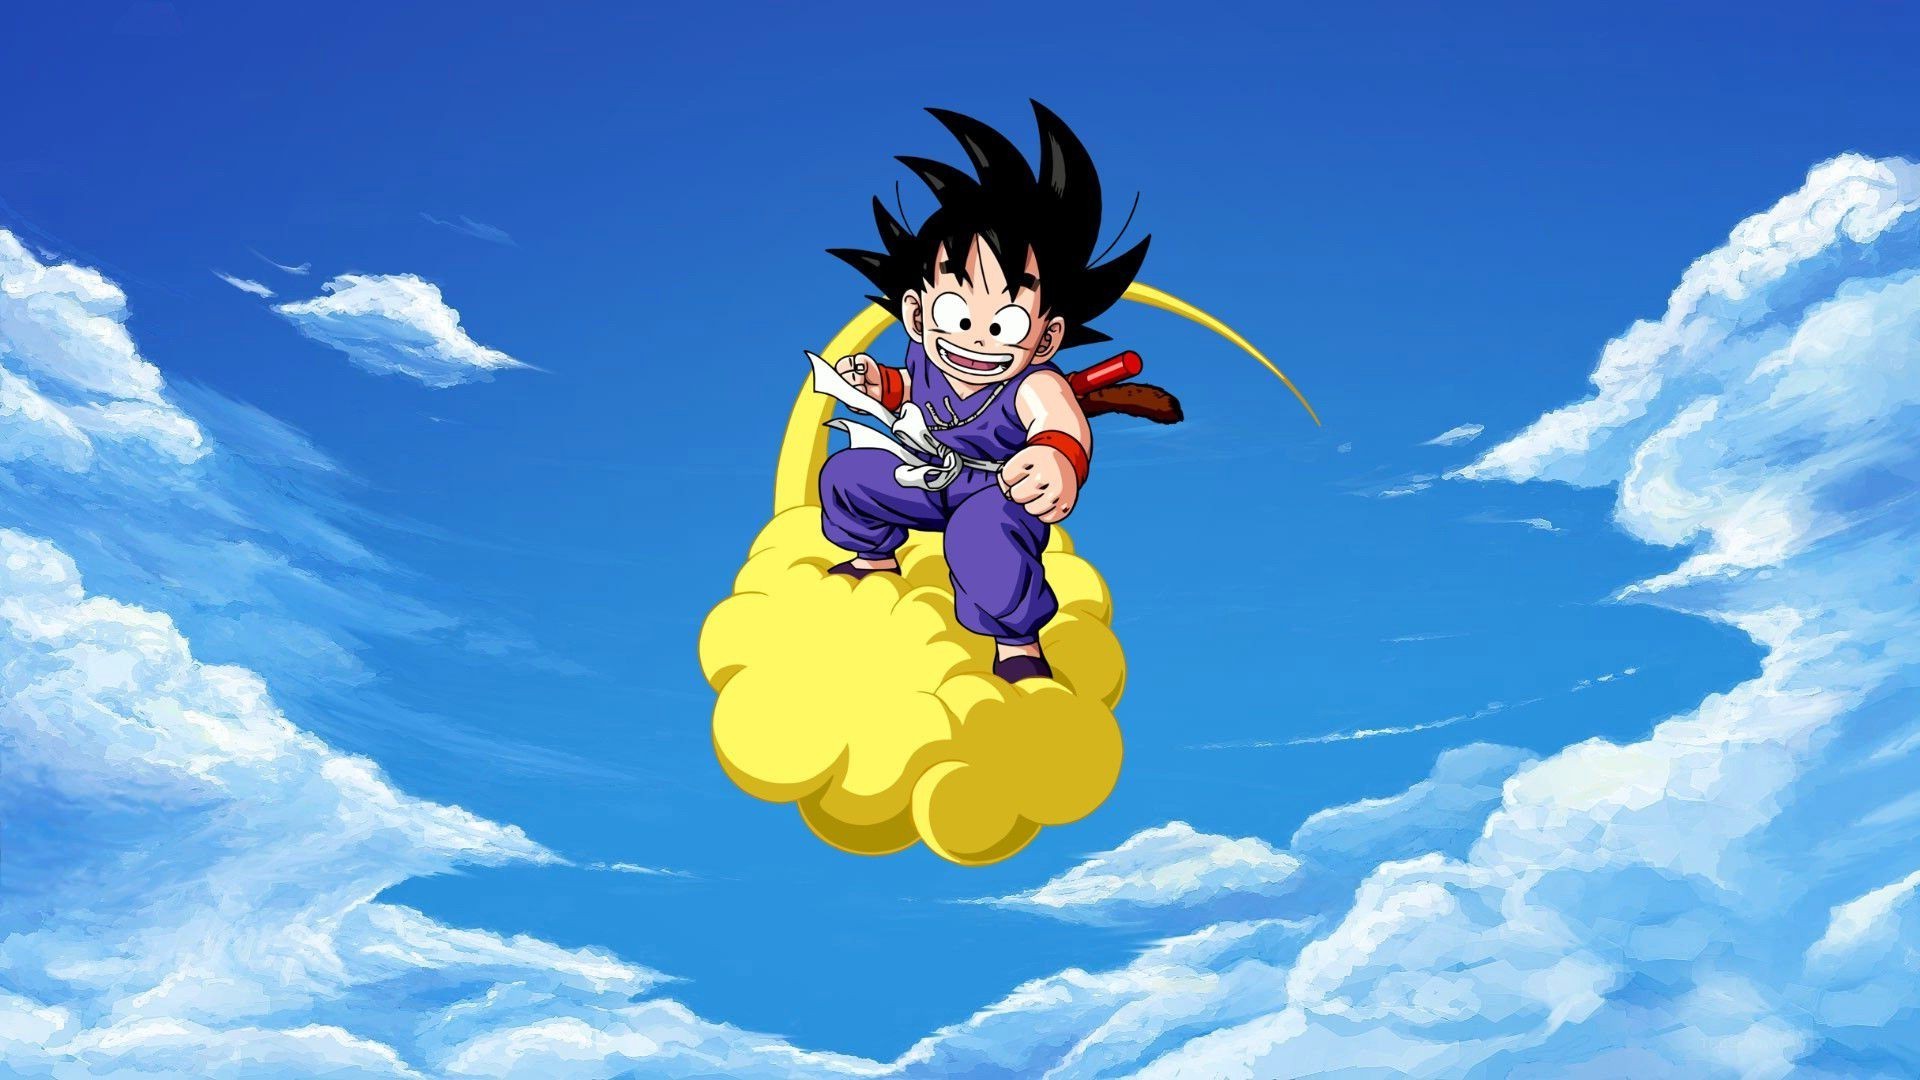 Wallpaper HD Kid Goku with image resolution 1920x1080 pixel. You can make this wallpaper for your Desktop Computer Backgrounds, Mac Wallpapers, Android Lock screen or iPhone Screensavers